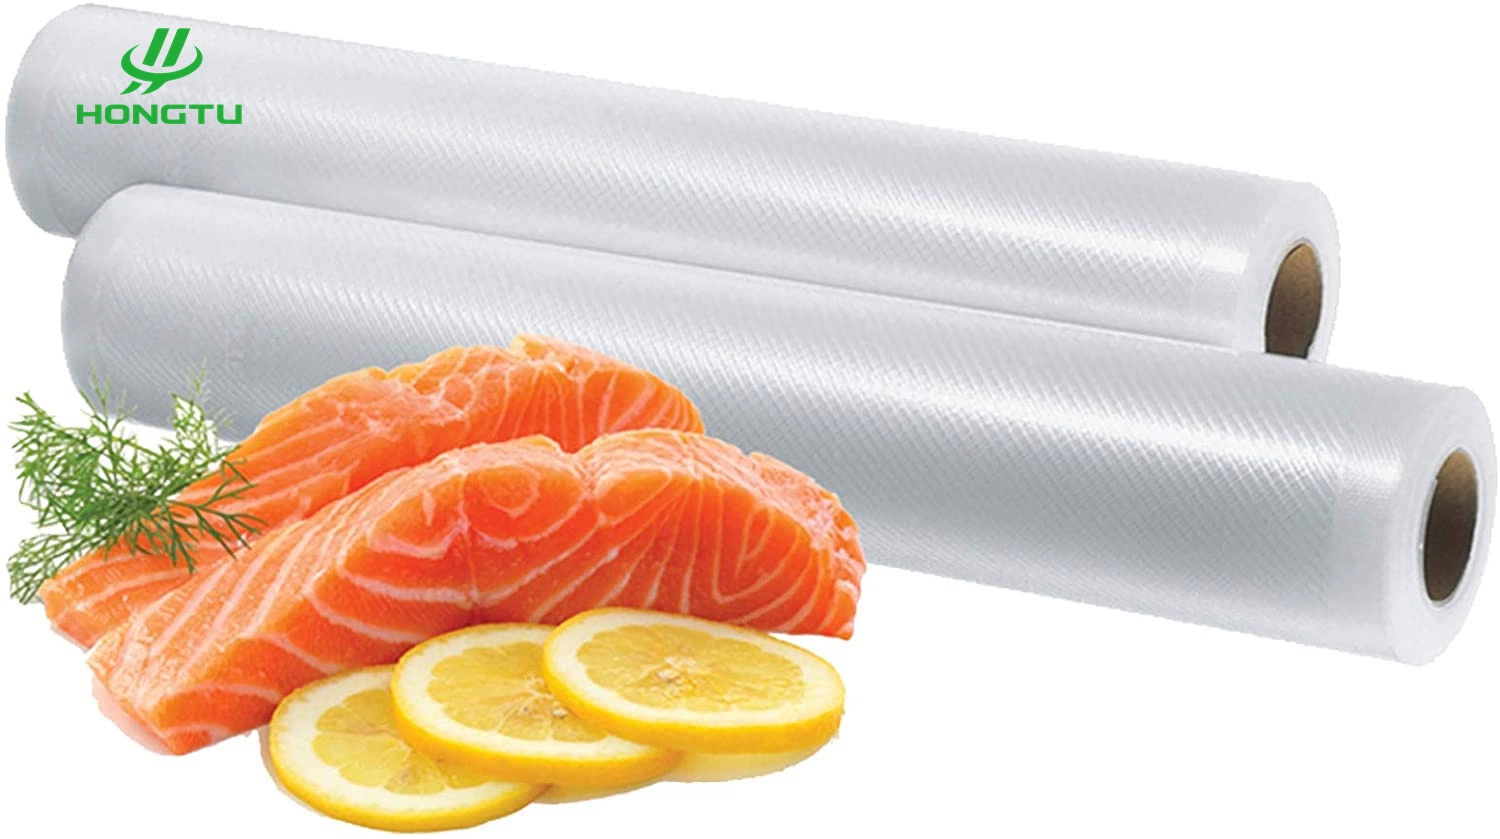 Puncture-Resistant 7 Layer Co-Extruded Film Embossed Textured Vacuum Sealer Bags Rolls Food Saver 20X600cm Sous Vide Freezer Bags